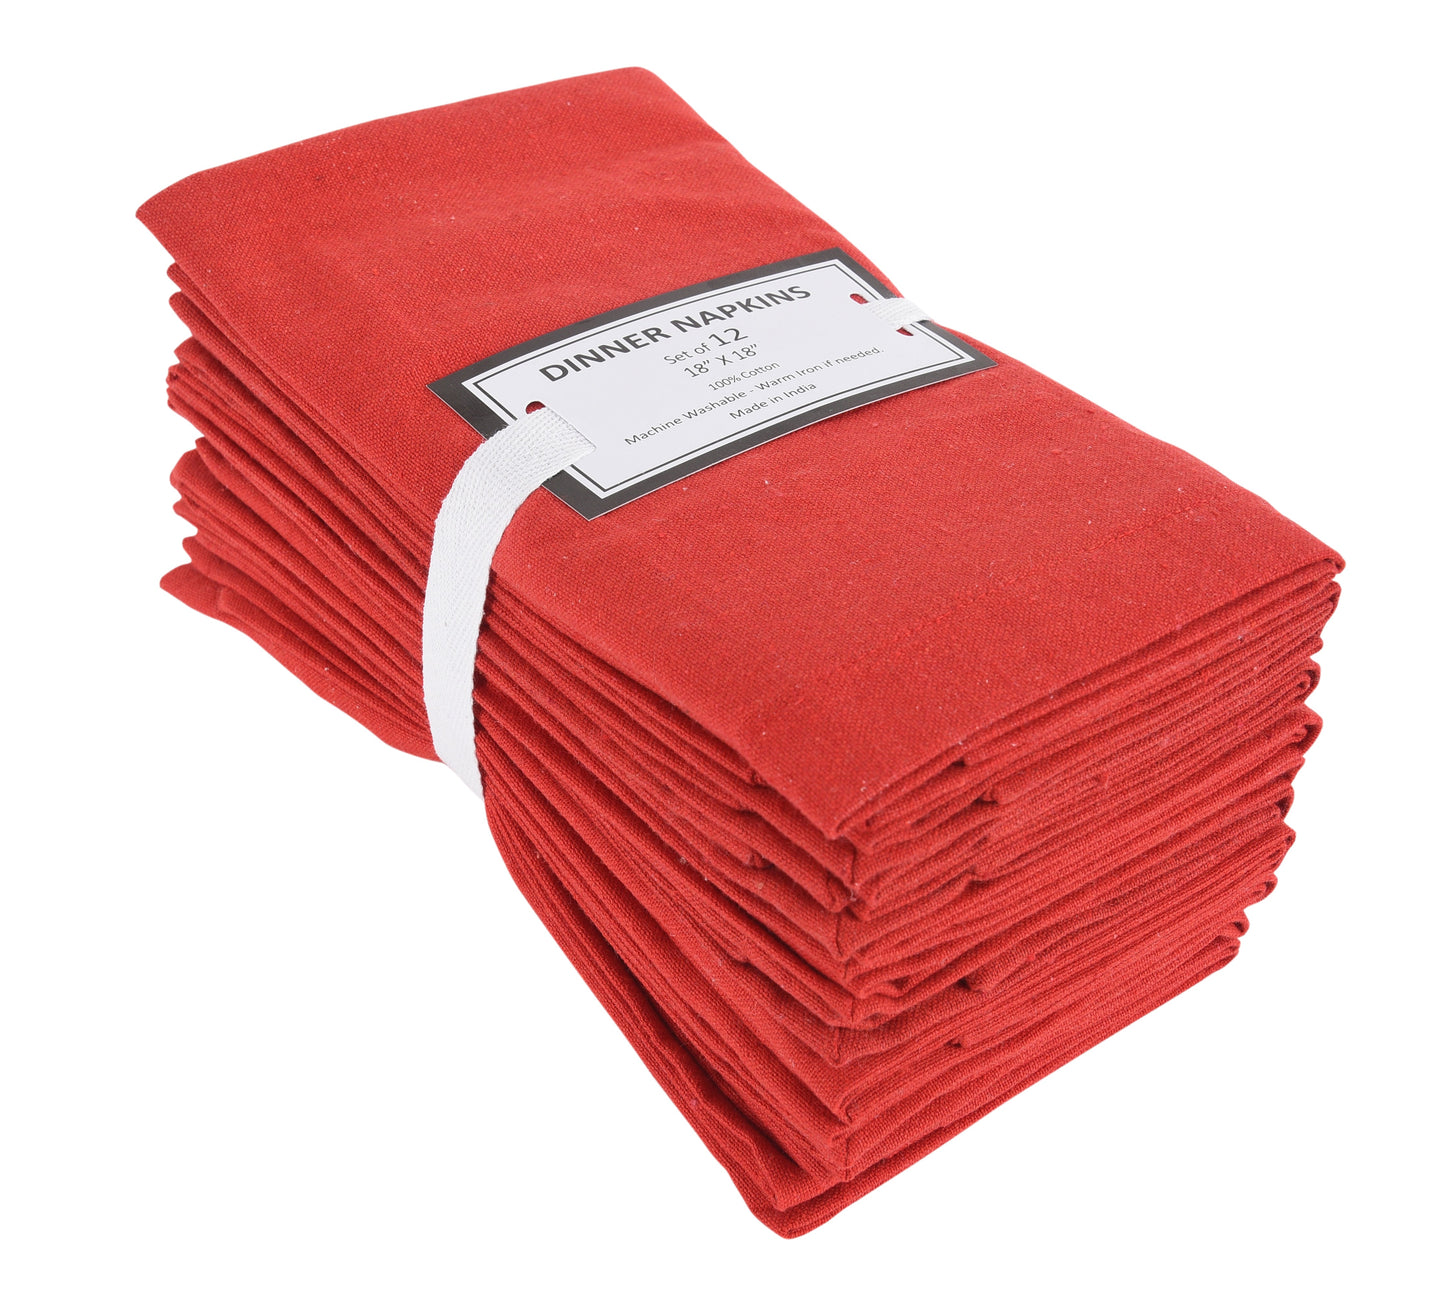 Lushomes Cloth Napkin Set of 12 with Mitted Corners Cotton Table Dinner Linen Eco-Friendly Cotton Fabric Machine Washable for Dinner Restaurant  Banquet 18x18 Inches 45x45 Cms Red